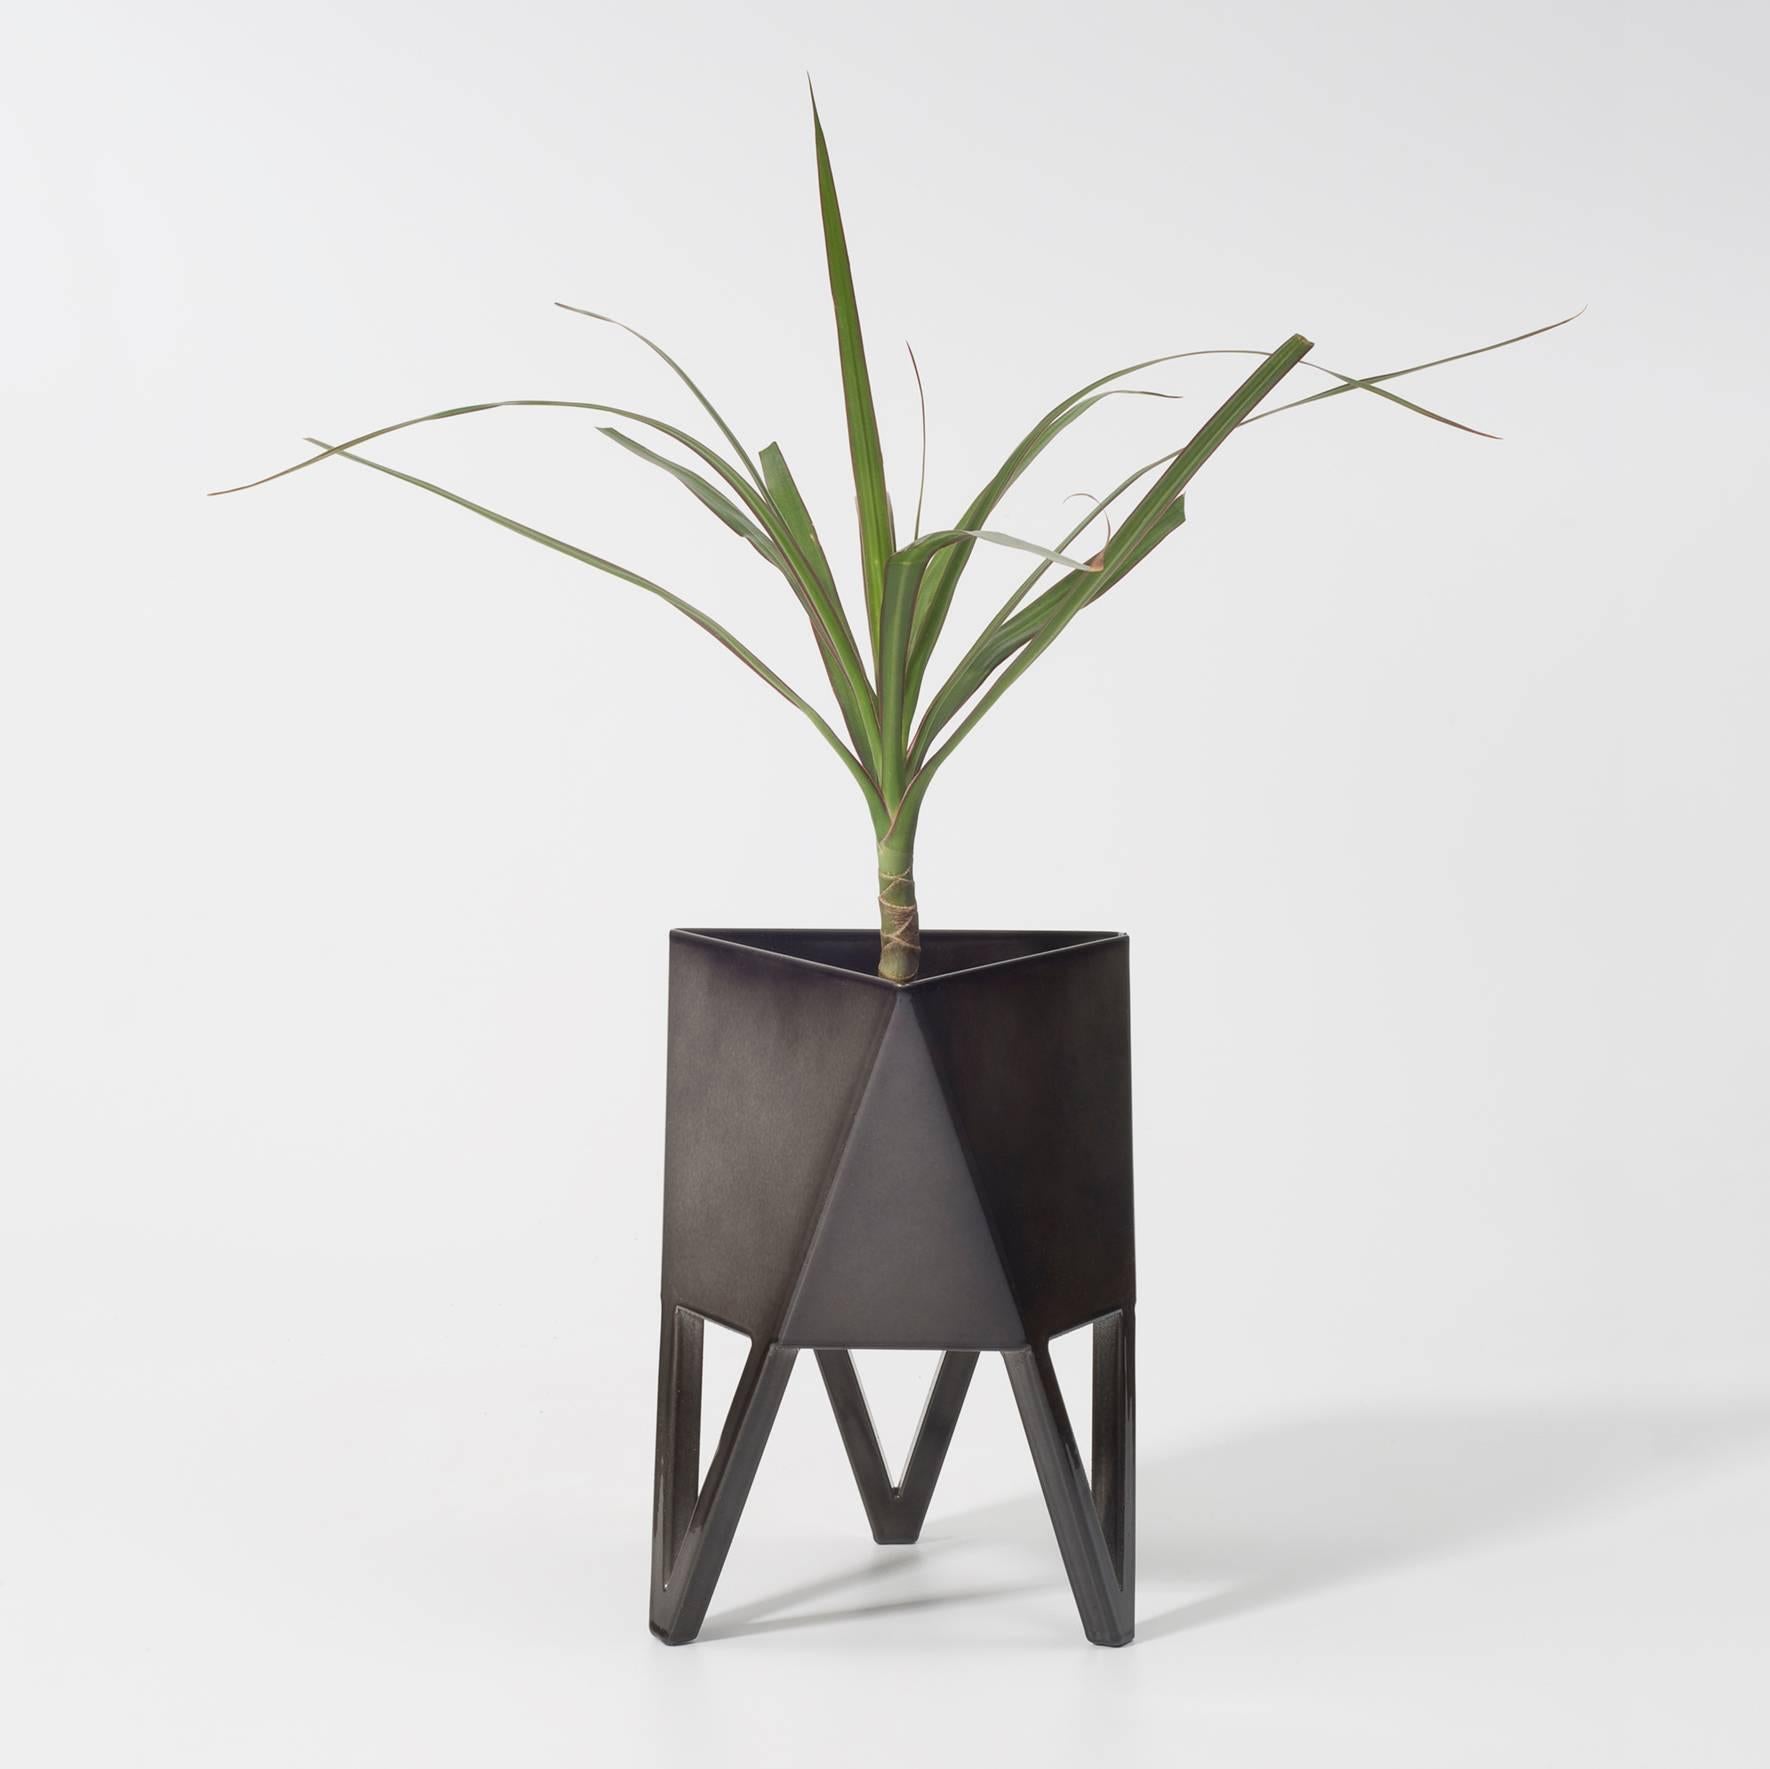 Deca Planter in Living Coral Steel, Medium, by Force/Collide 3